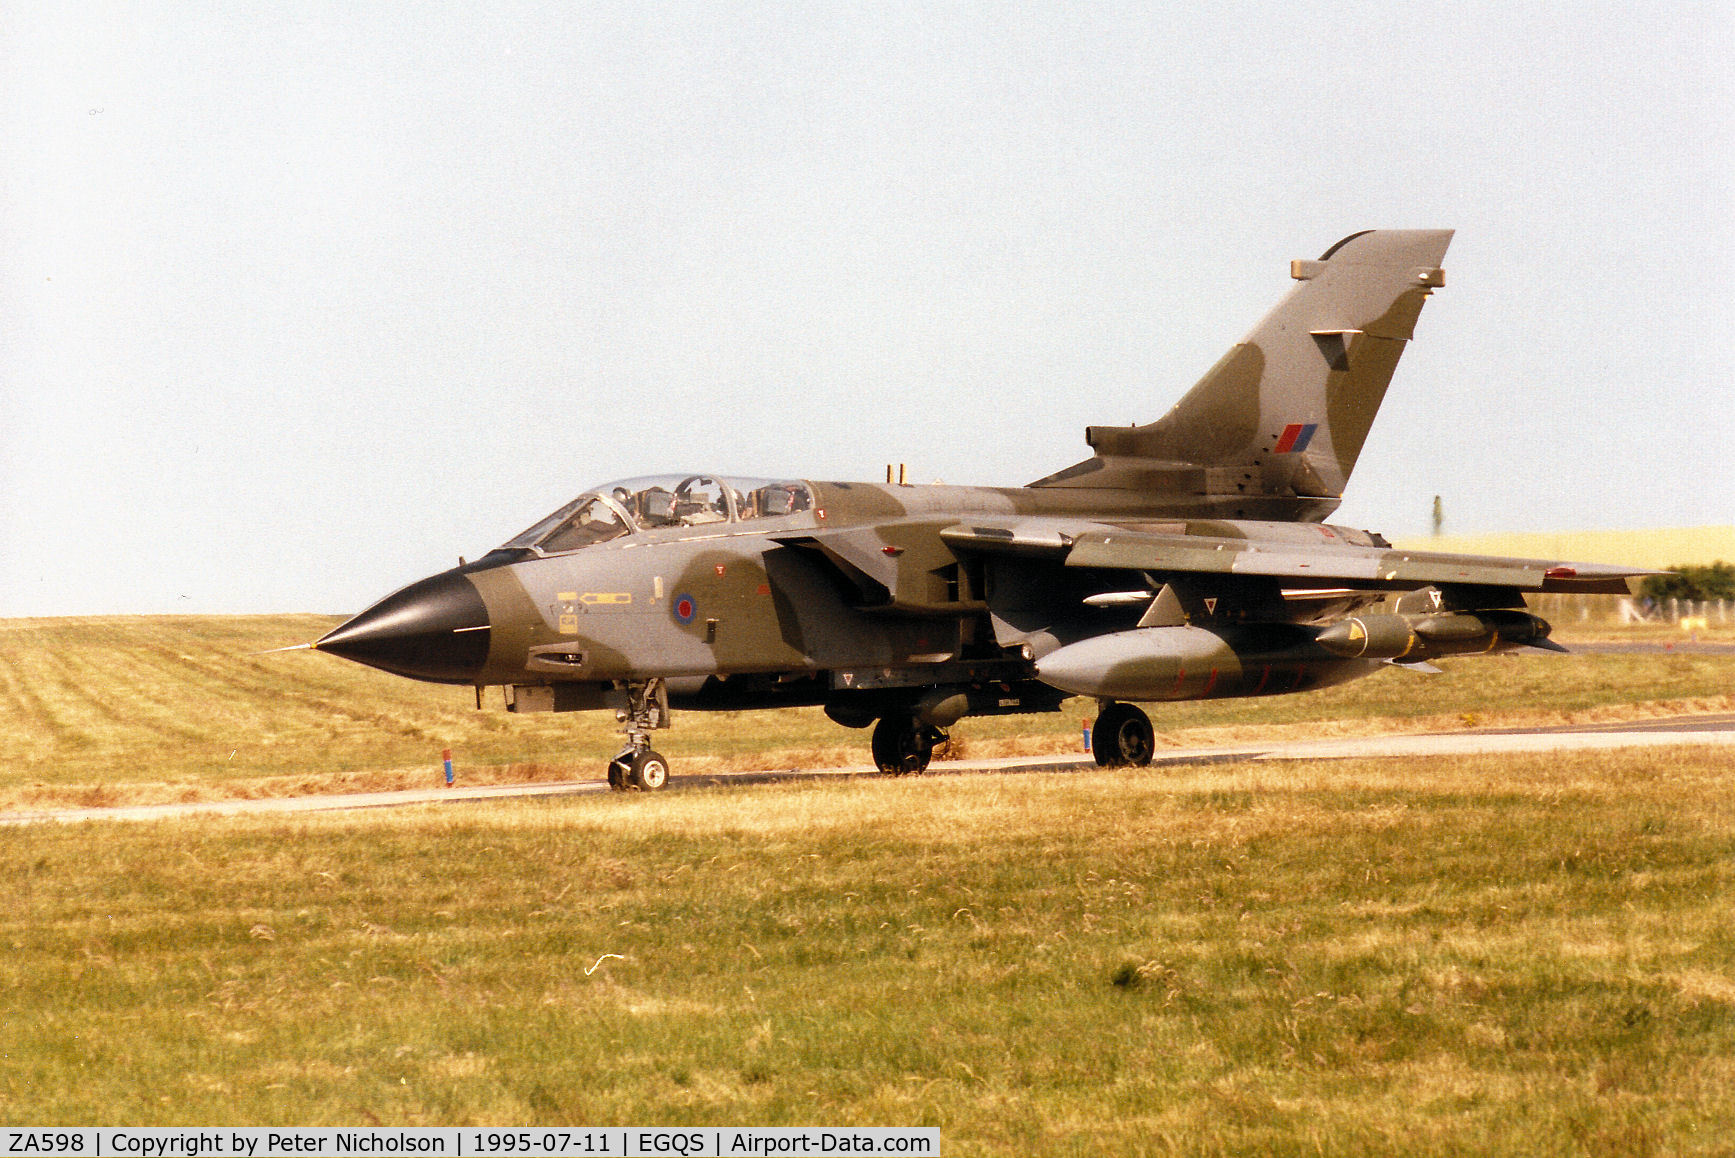 ZA598, 1982 Panavia Tornado GR.1 C/N 118/BT024/3062, Tornado GR.1B, callsign Saxon 1, of 617 Squadron taxying to the active runway at RAF Lossiemouth in the Summer of 1995.